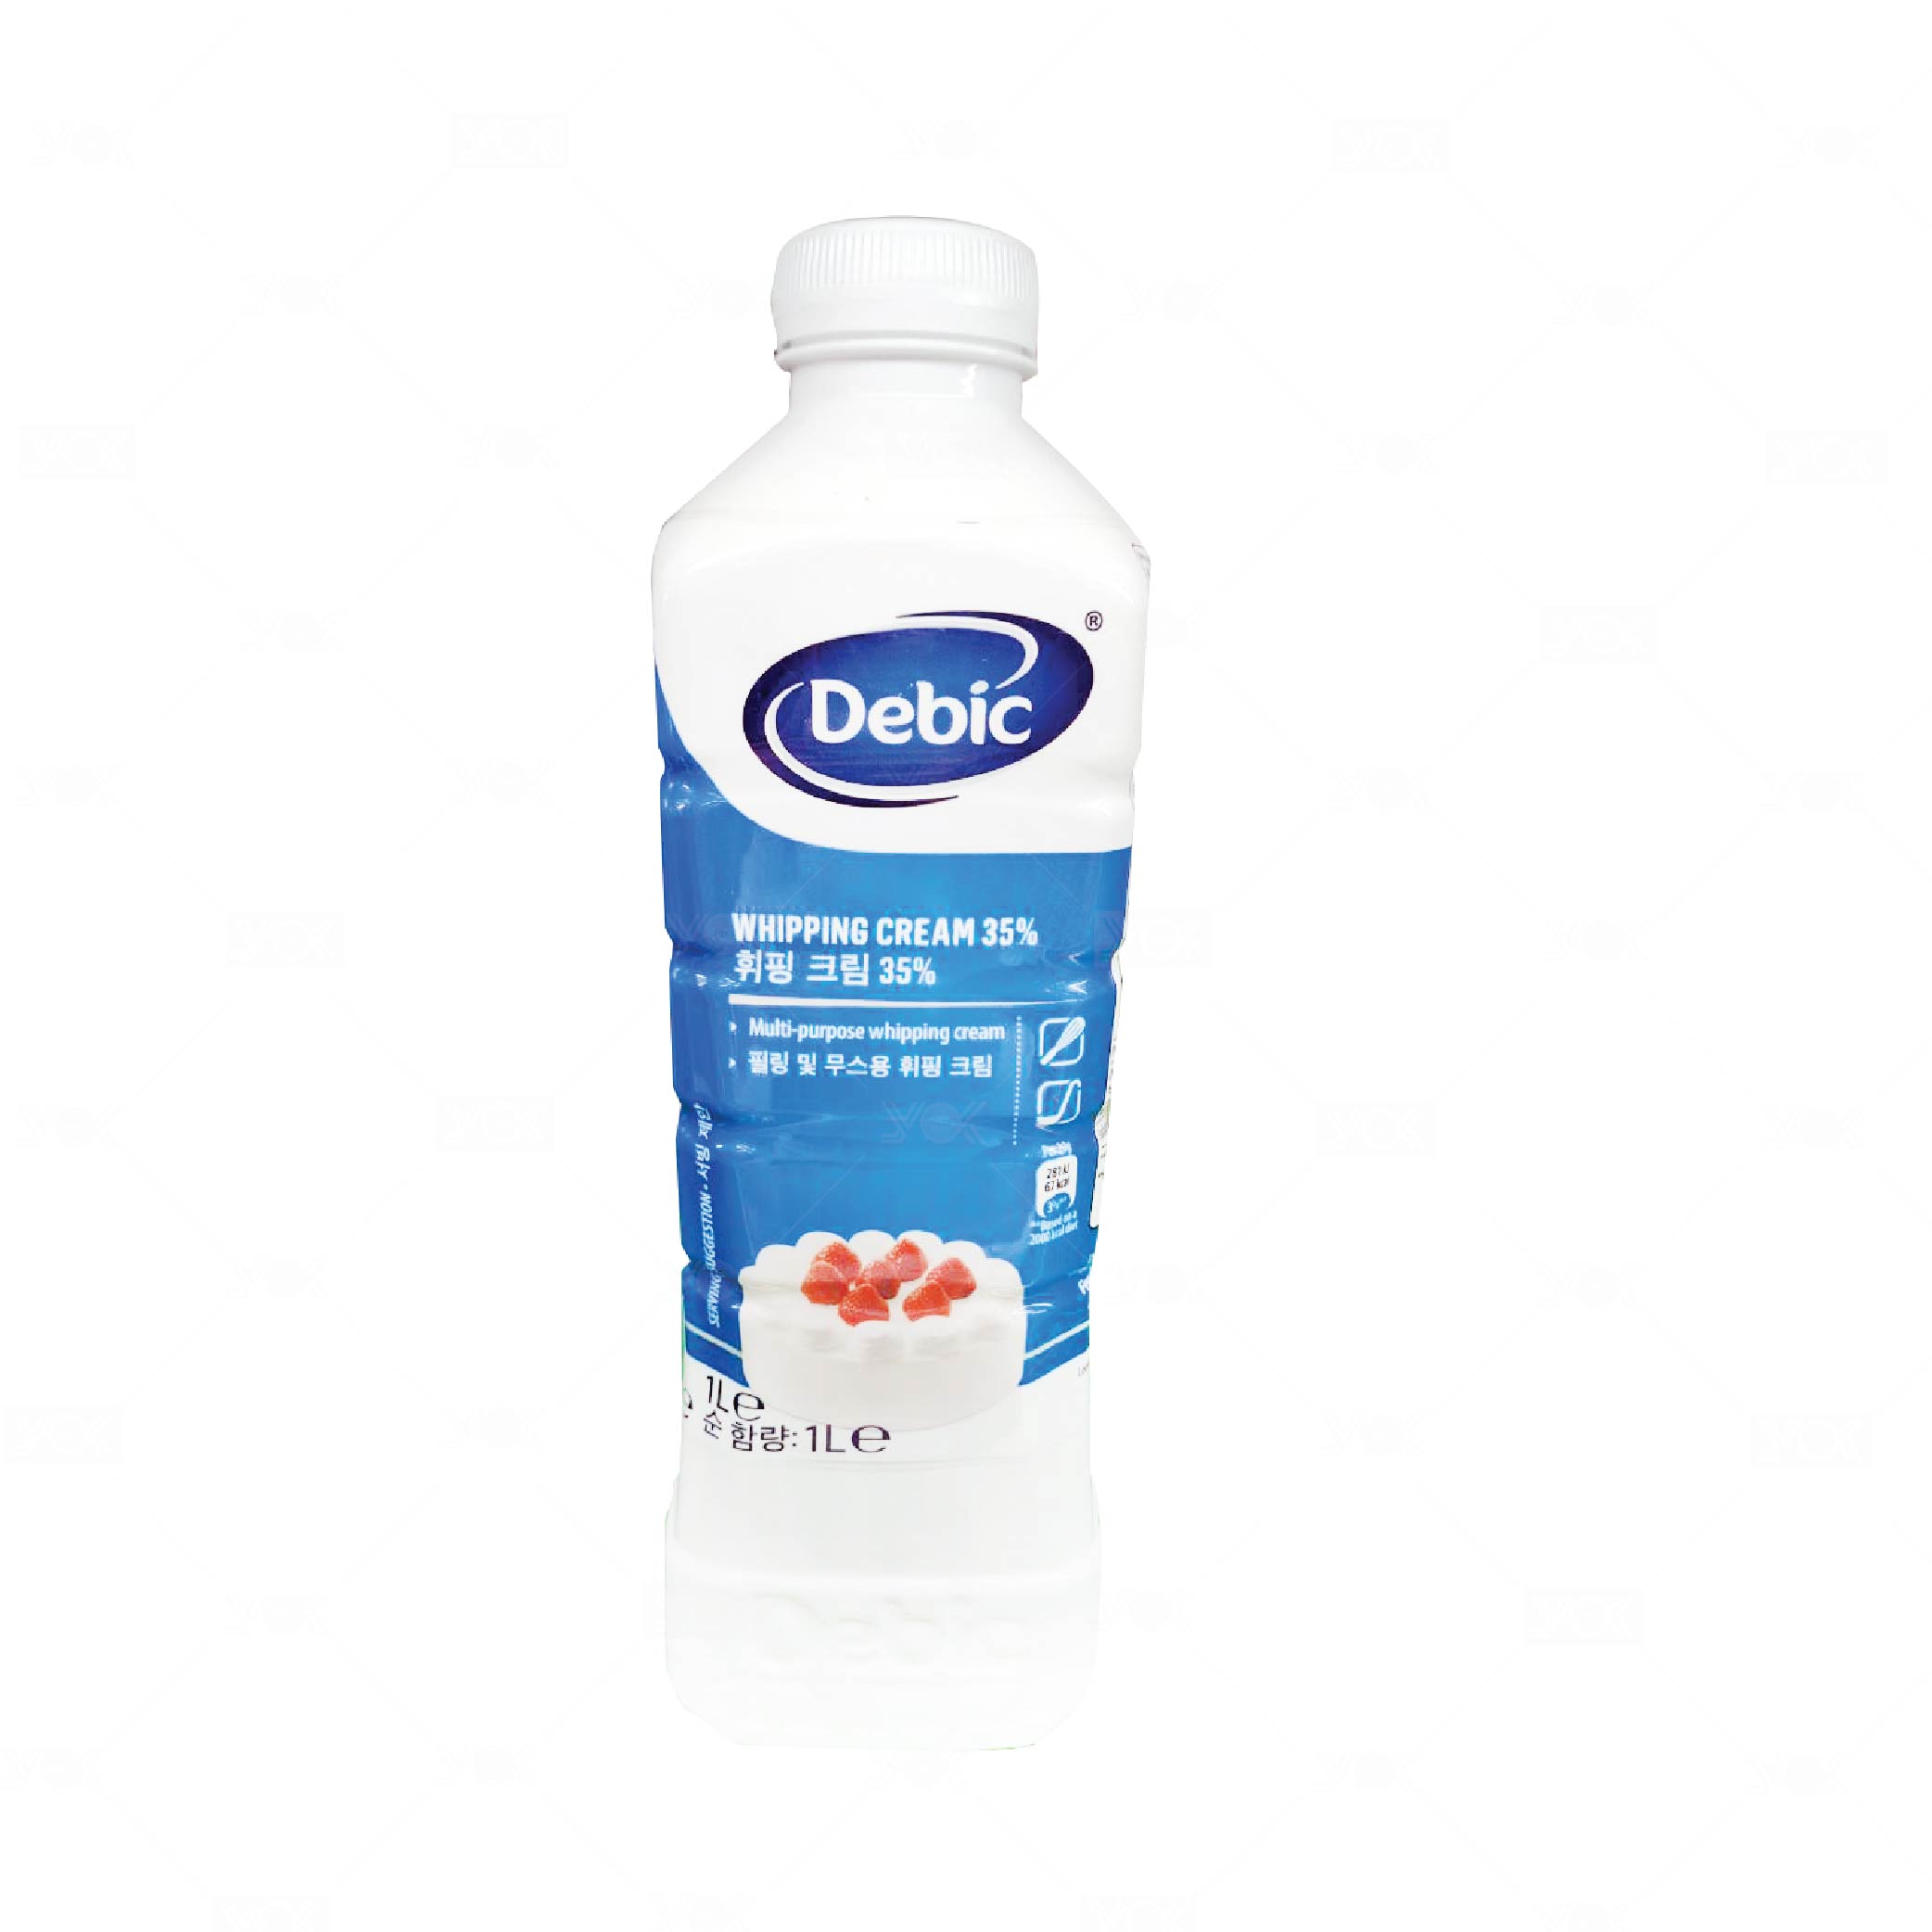 DEBIC Dairy Whipping Cream 35% 1Ltr.